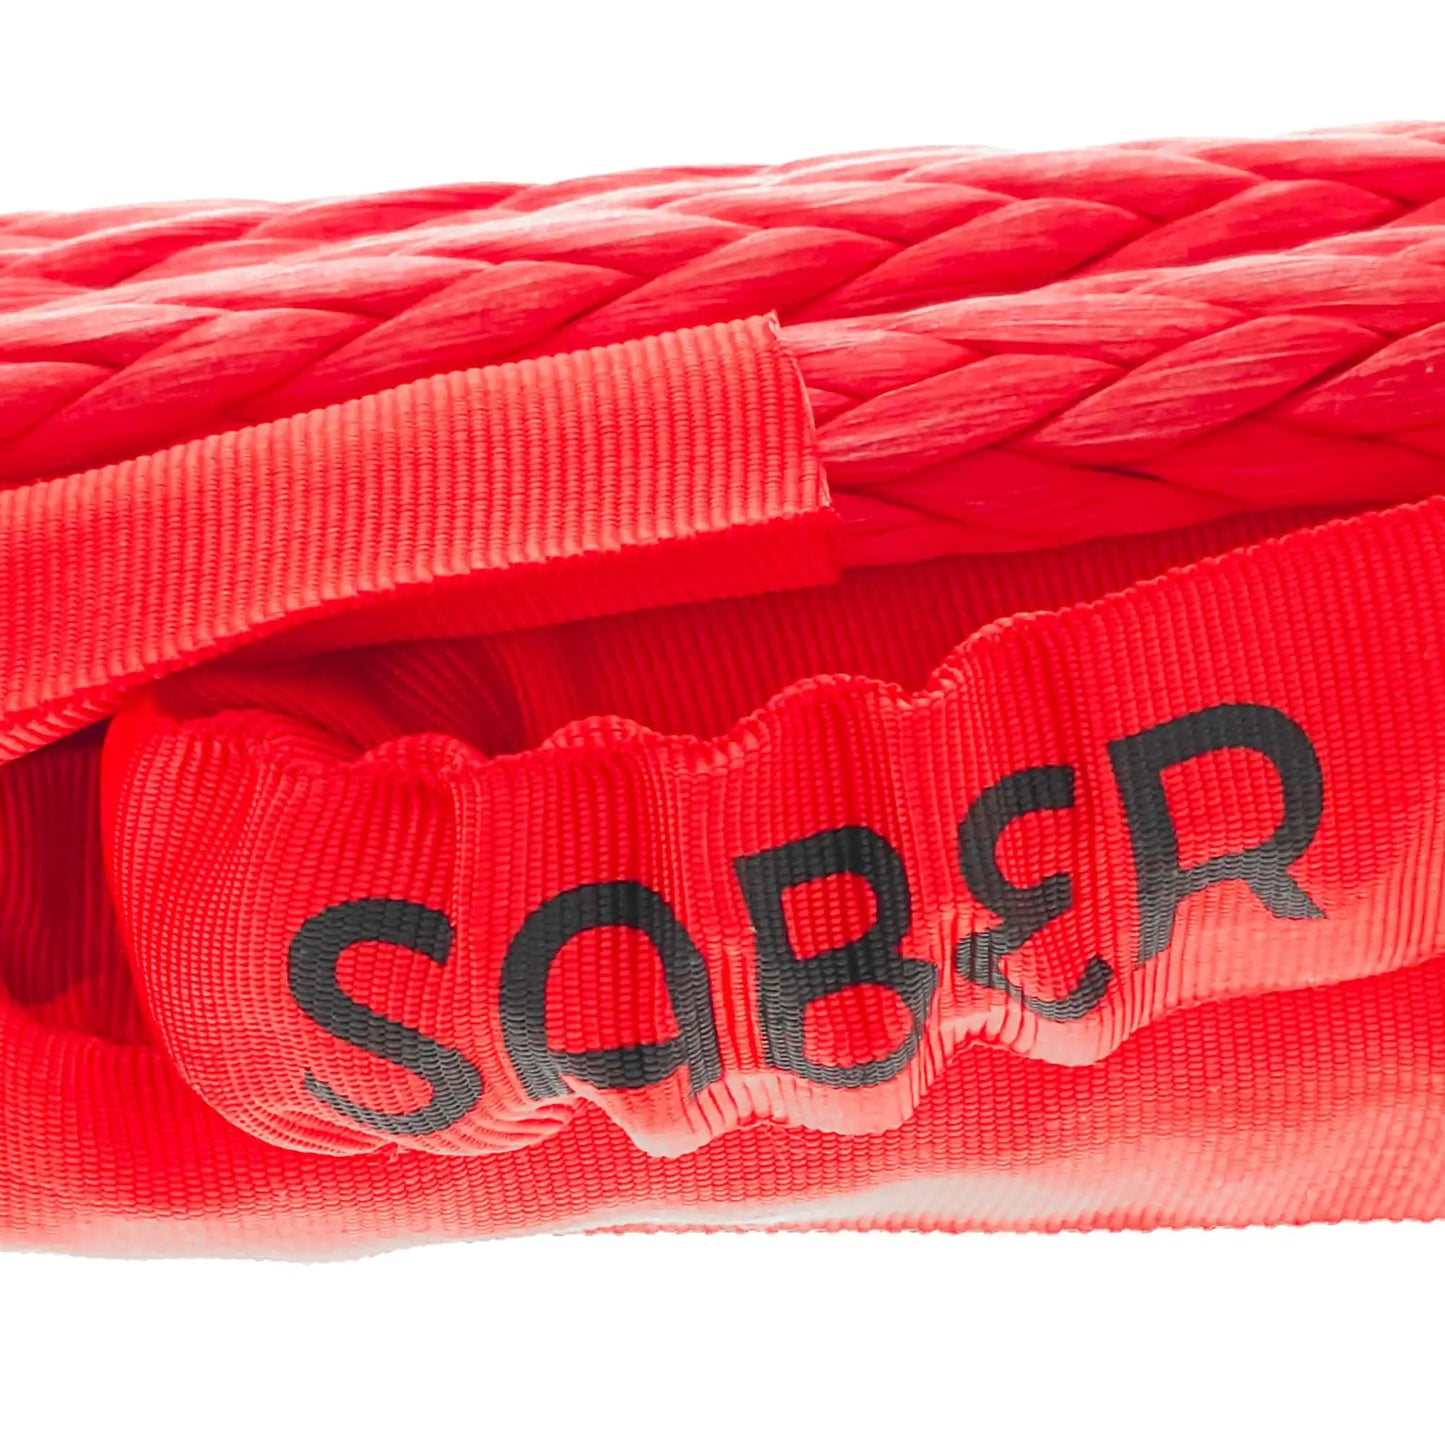 Saber Offroad - 14mm Red Bridle with Red Sheath -